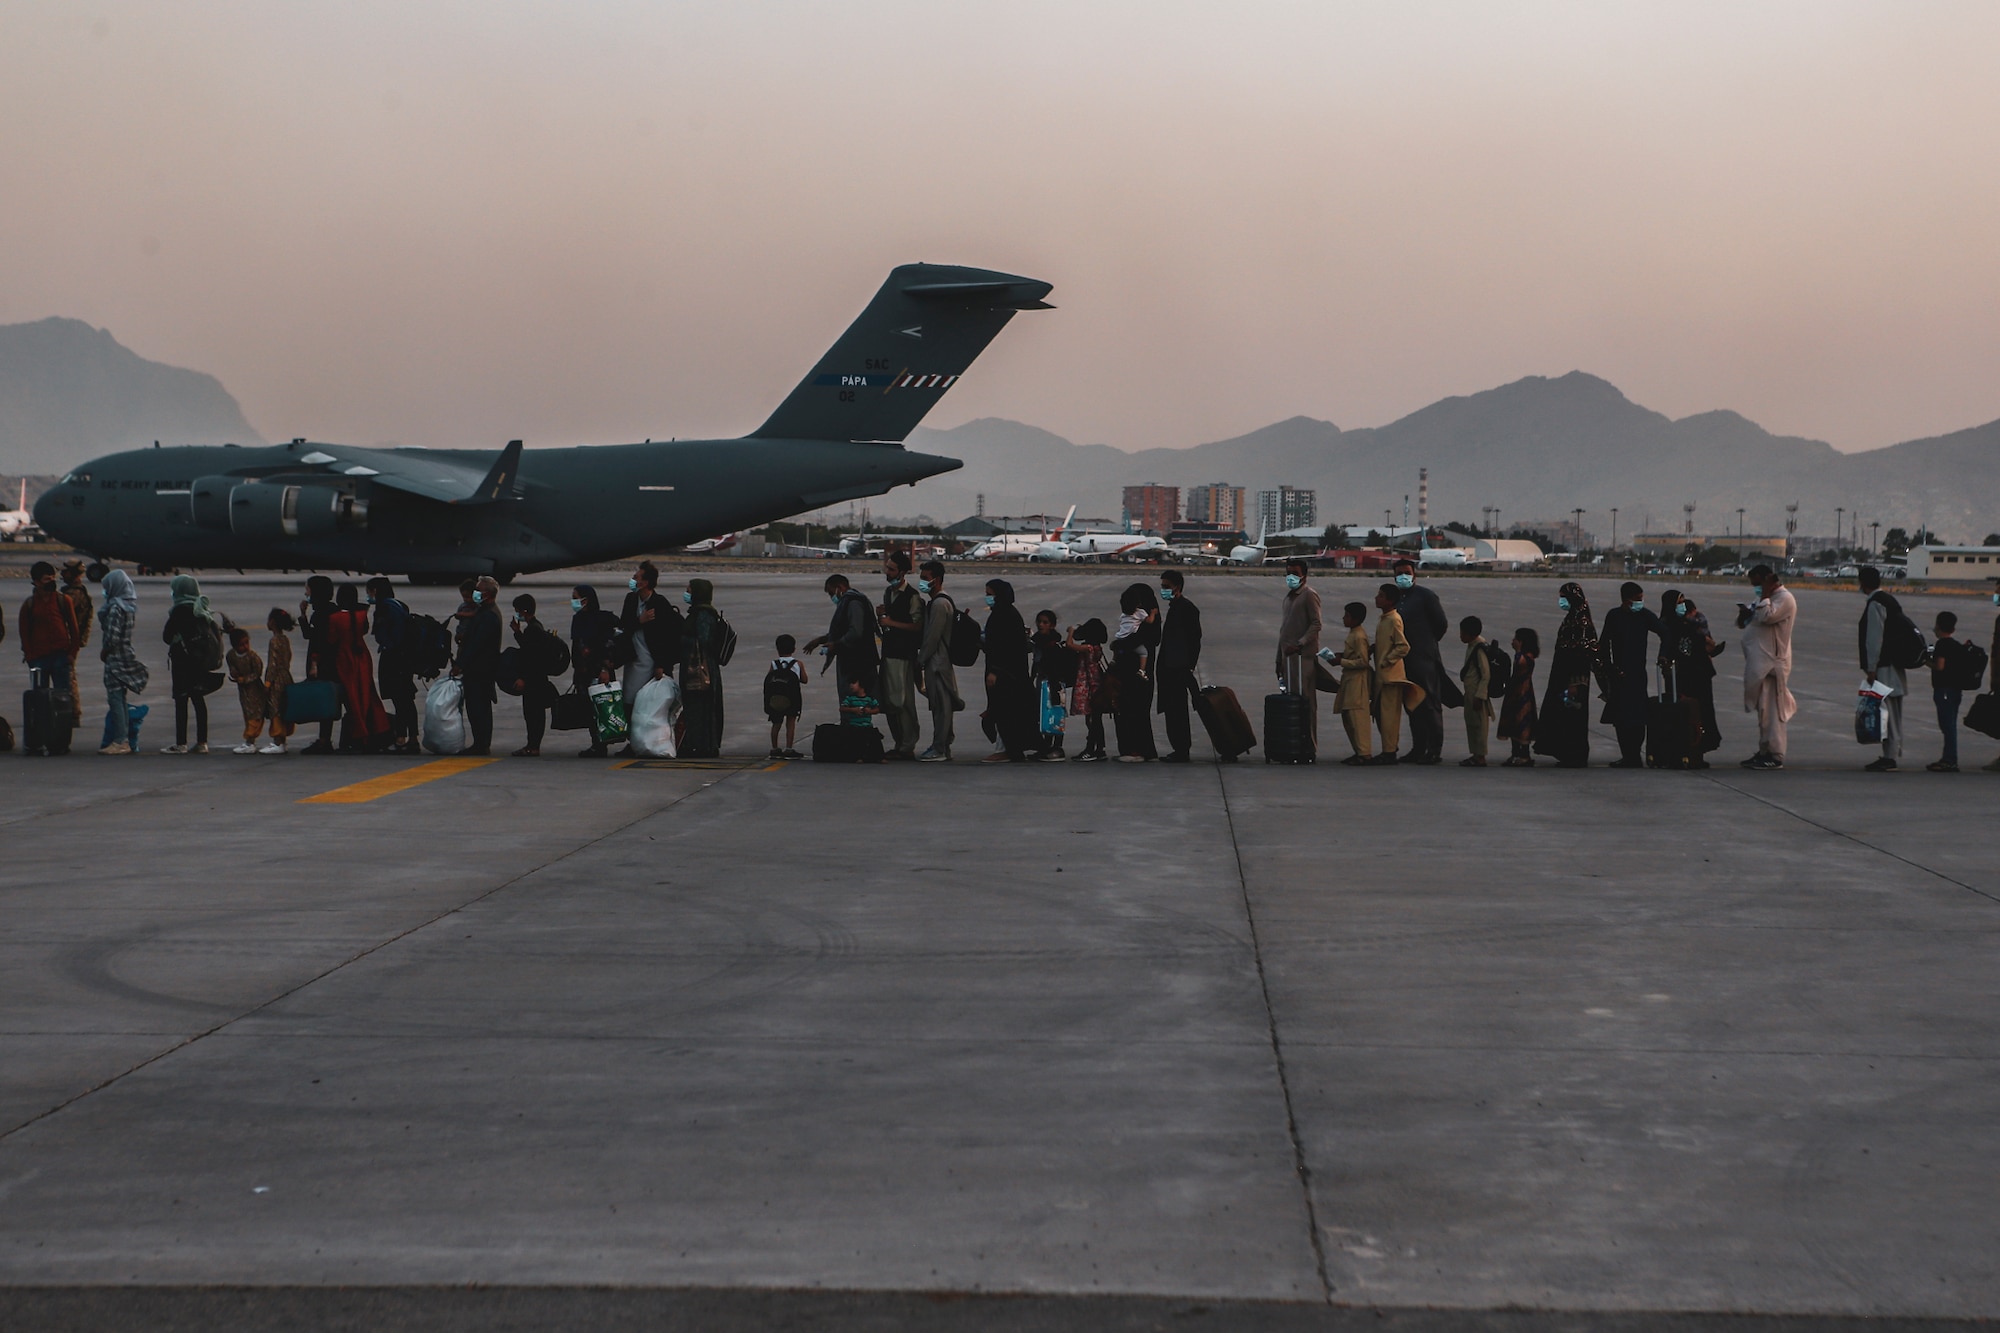 Evacuees wait to board a Boeing C-17 Globemaster III during an evacuation at Hamid Karzai International Airport, Kabul, Afghanistan, Aug. 23. U.S. service members are assisting the Department of State with a Non-combatant Evacuation Operation (NEO) in Afghanistan. (U.S. Marine Corps photo by Sgt. Isaiah Campbell)